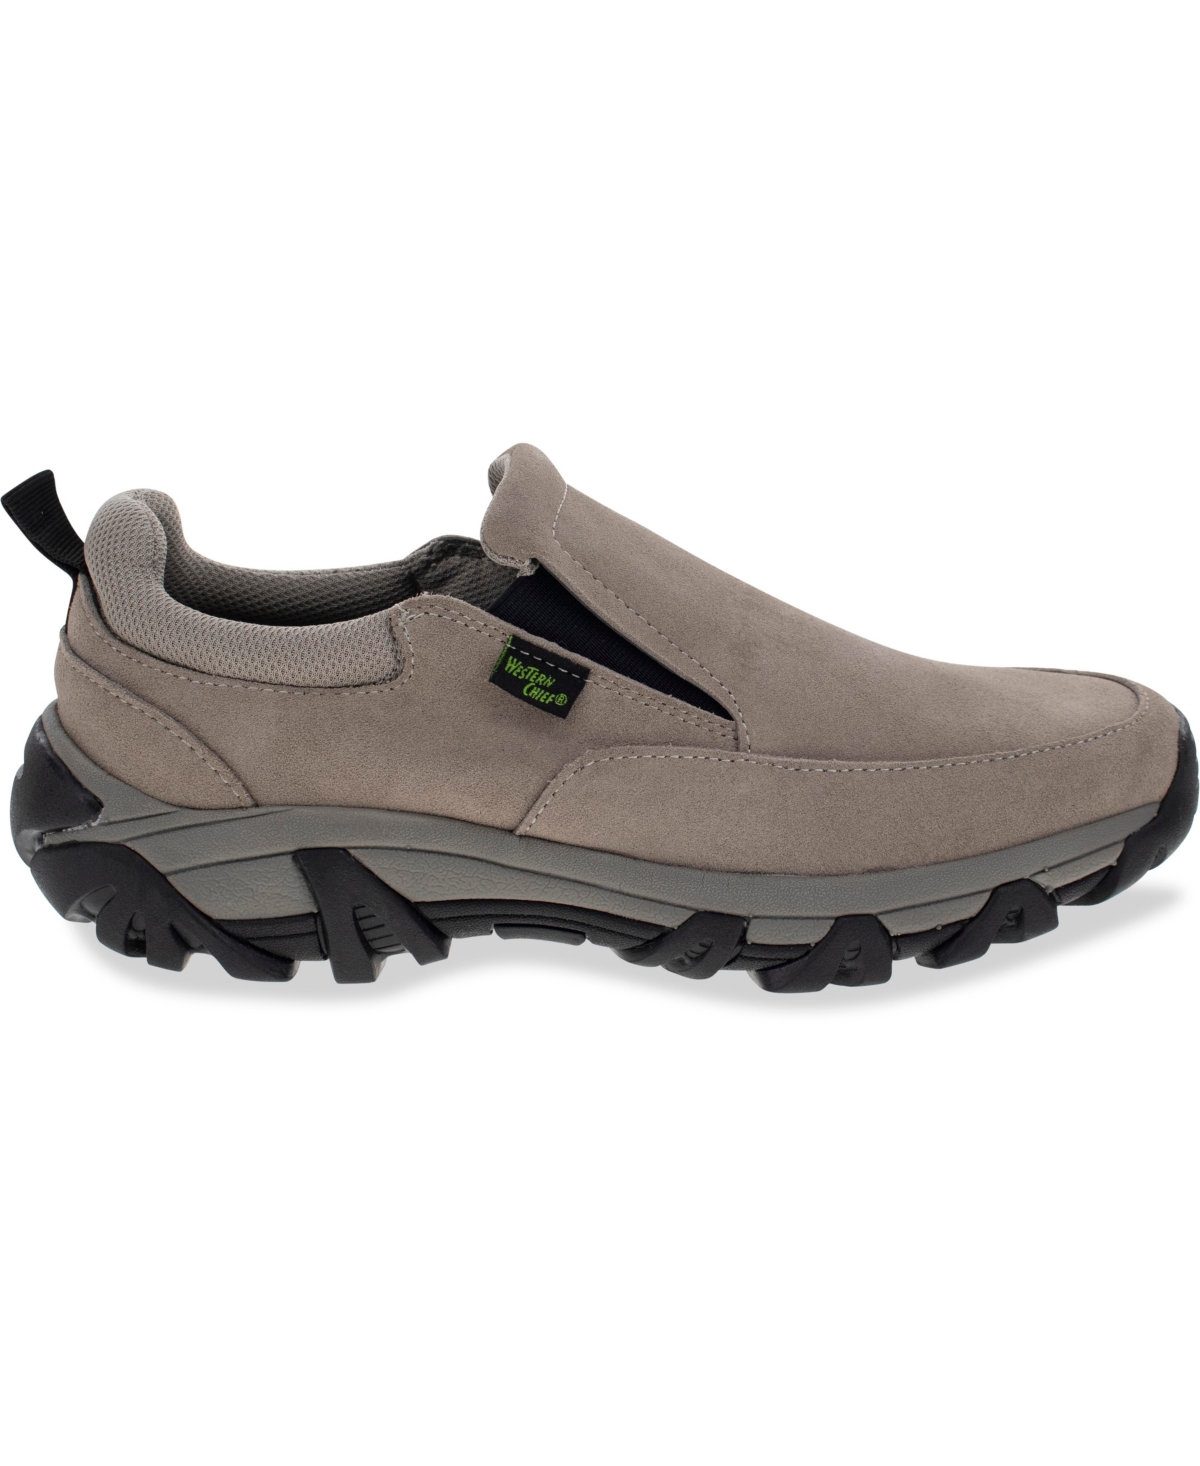 Men's Townsend Casual Shoe - Taupe